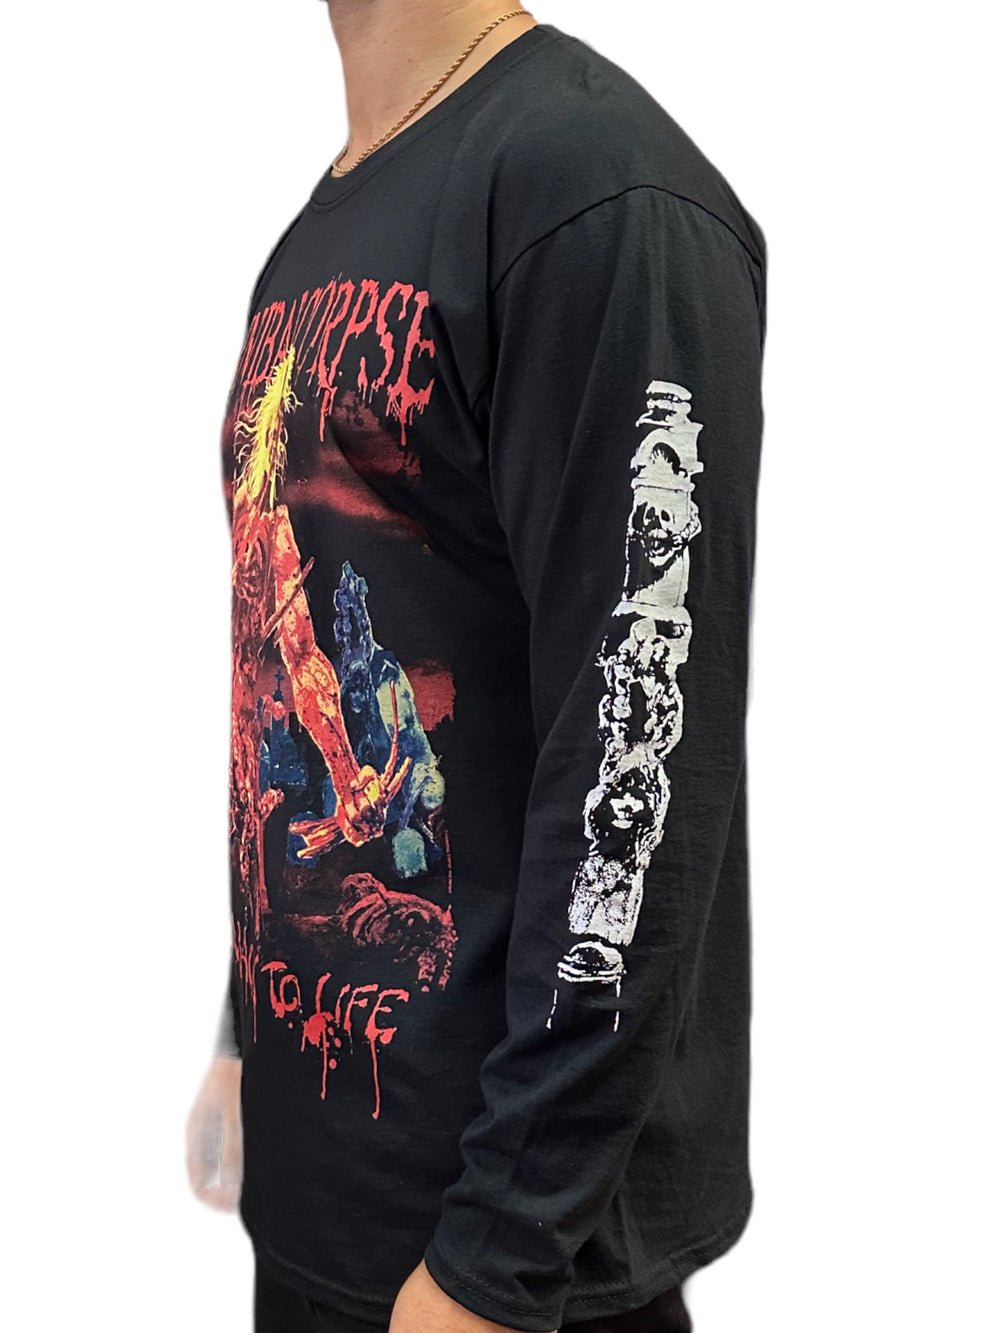 Cannibal Corpse Eaten Official Unisex Long Sleeved Shirt Various Sizes Front & Back Print: NEW